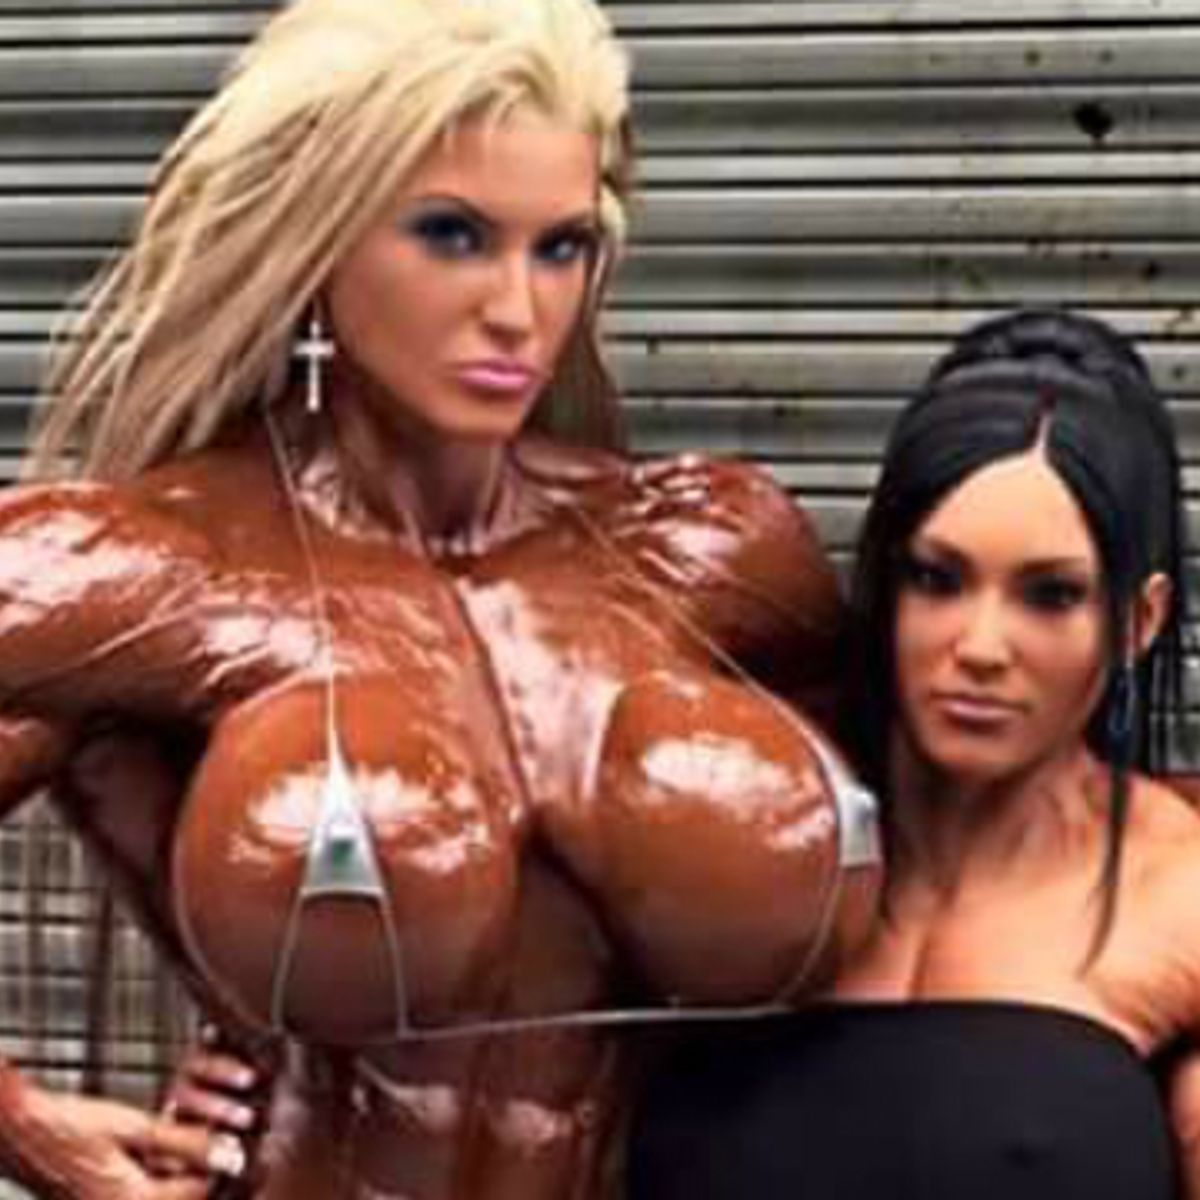 Muscular women with huge tits